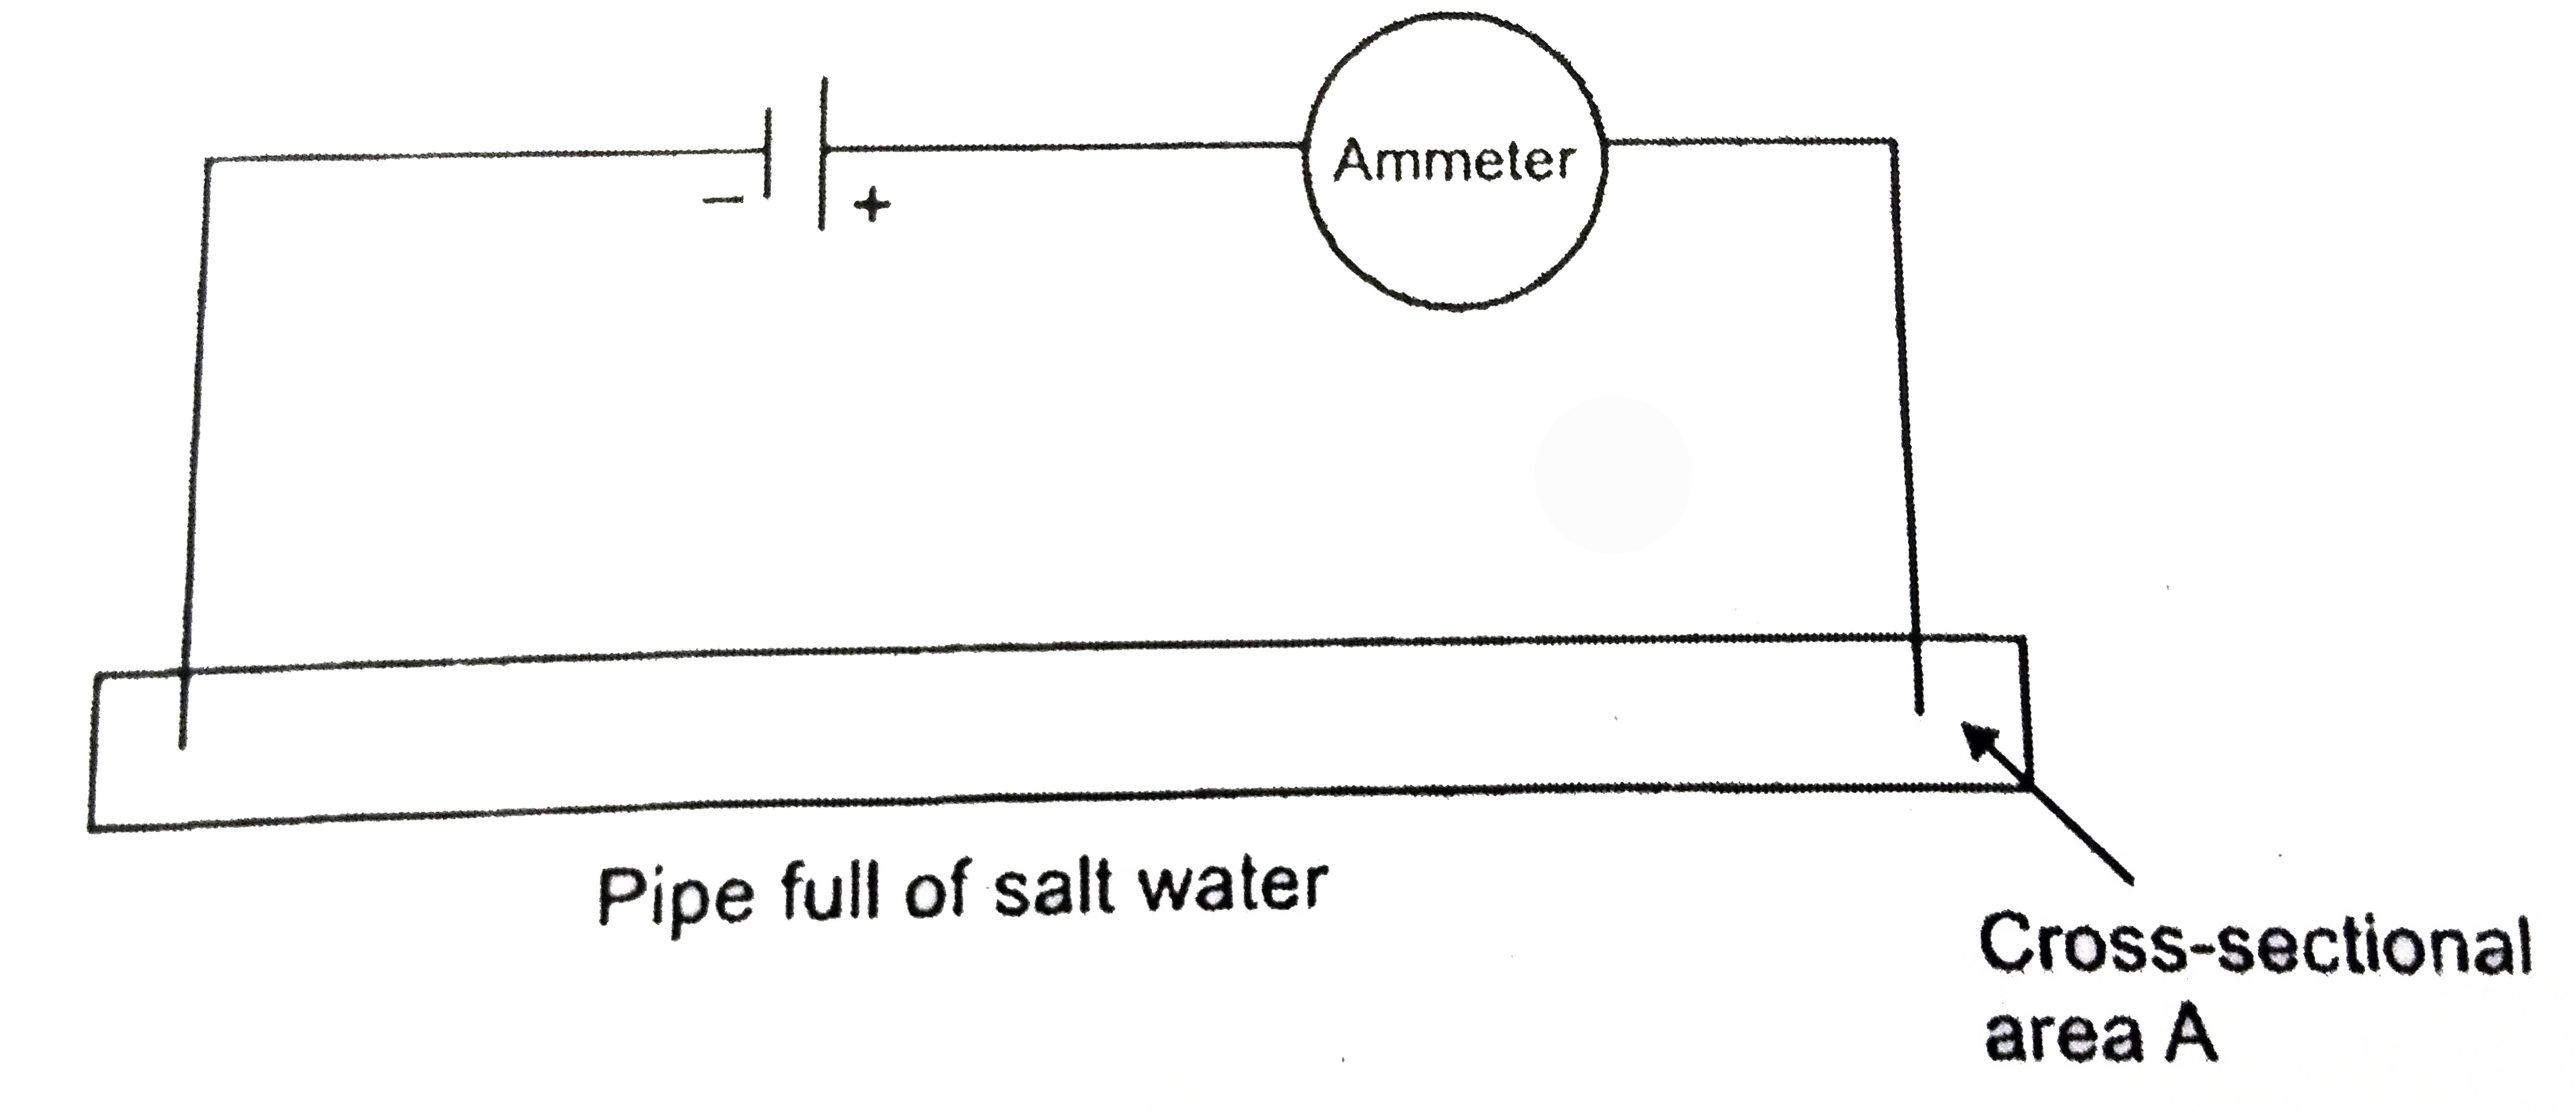 Salt water contains n sodium ions (Na+) per cubic meter and n chloride ions (CI-) per cubic meter. A battery is conneted to metal rods that dip into a narrow pipe full of salt water. The cross sectional  area of the pipe is A. The magnitude of the drift velocity of the sodium lons is V(Na) and the megnitude of the drift velocity of the chloride ions is V(CI) Assume that N(Na)gtC(CI)(+e is the charge of a proton).       What is the magnitude of the ammeter reading ?